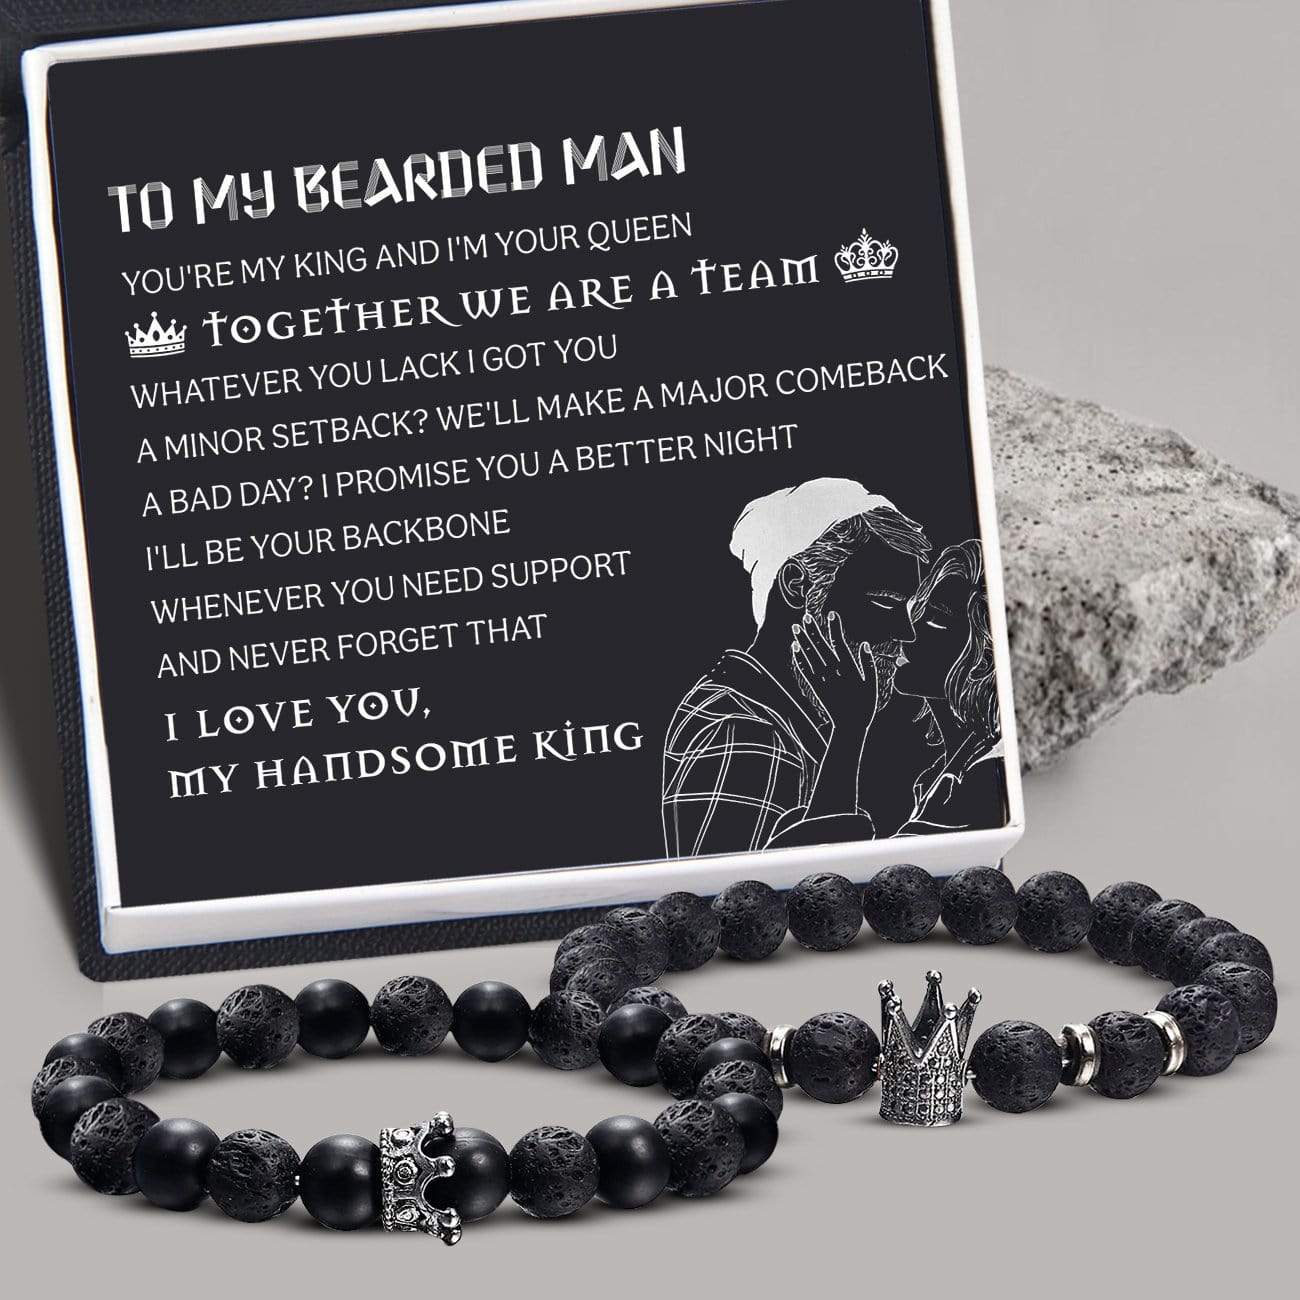 King & Queen Couple Bracelets - To My Bearded Man - Together We Are A Team - Gbae26004